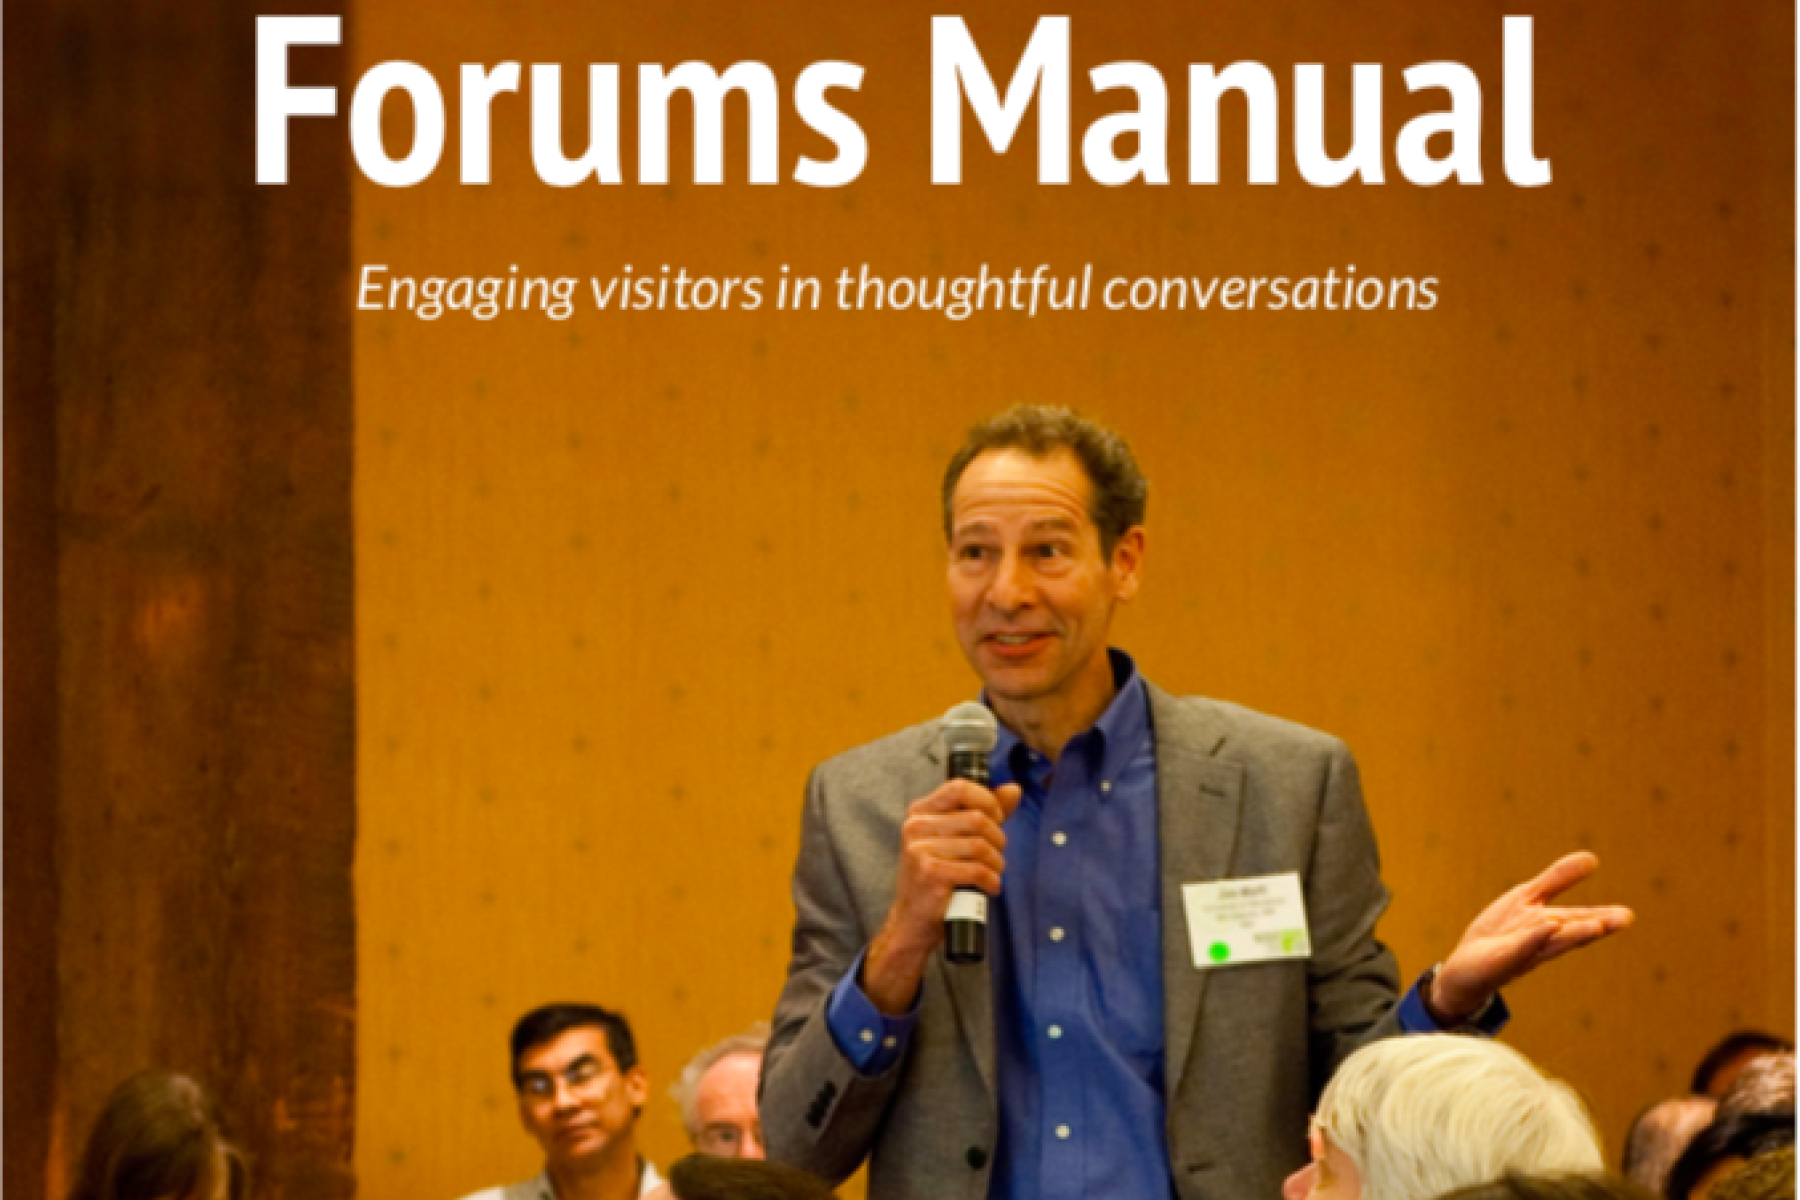 forums manual cover featuring a man with a microphone in an audience asking a question